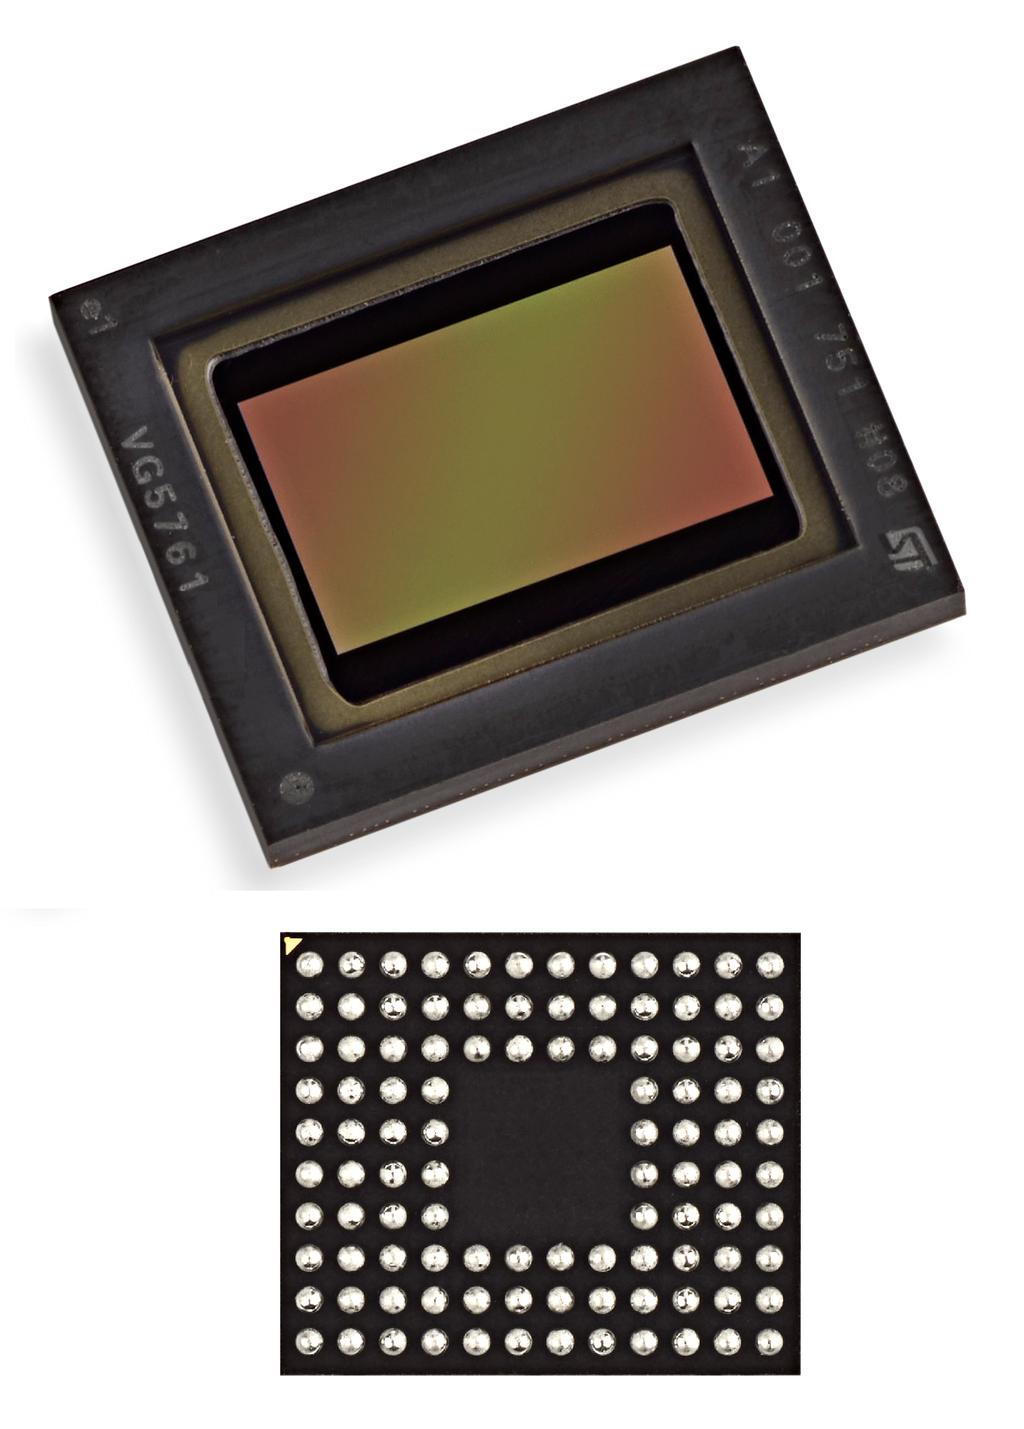 VG5761, VG5661 VD5761, VD5661 Data brief Automotive 1.6-2.3 megapixel high-dynamic global shutter image sensor Features Product summary Root part number Resolution (megapixel) Package VG5661 1.